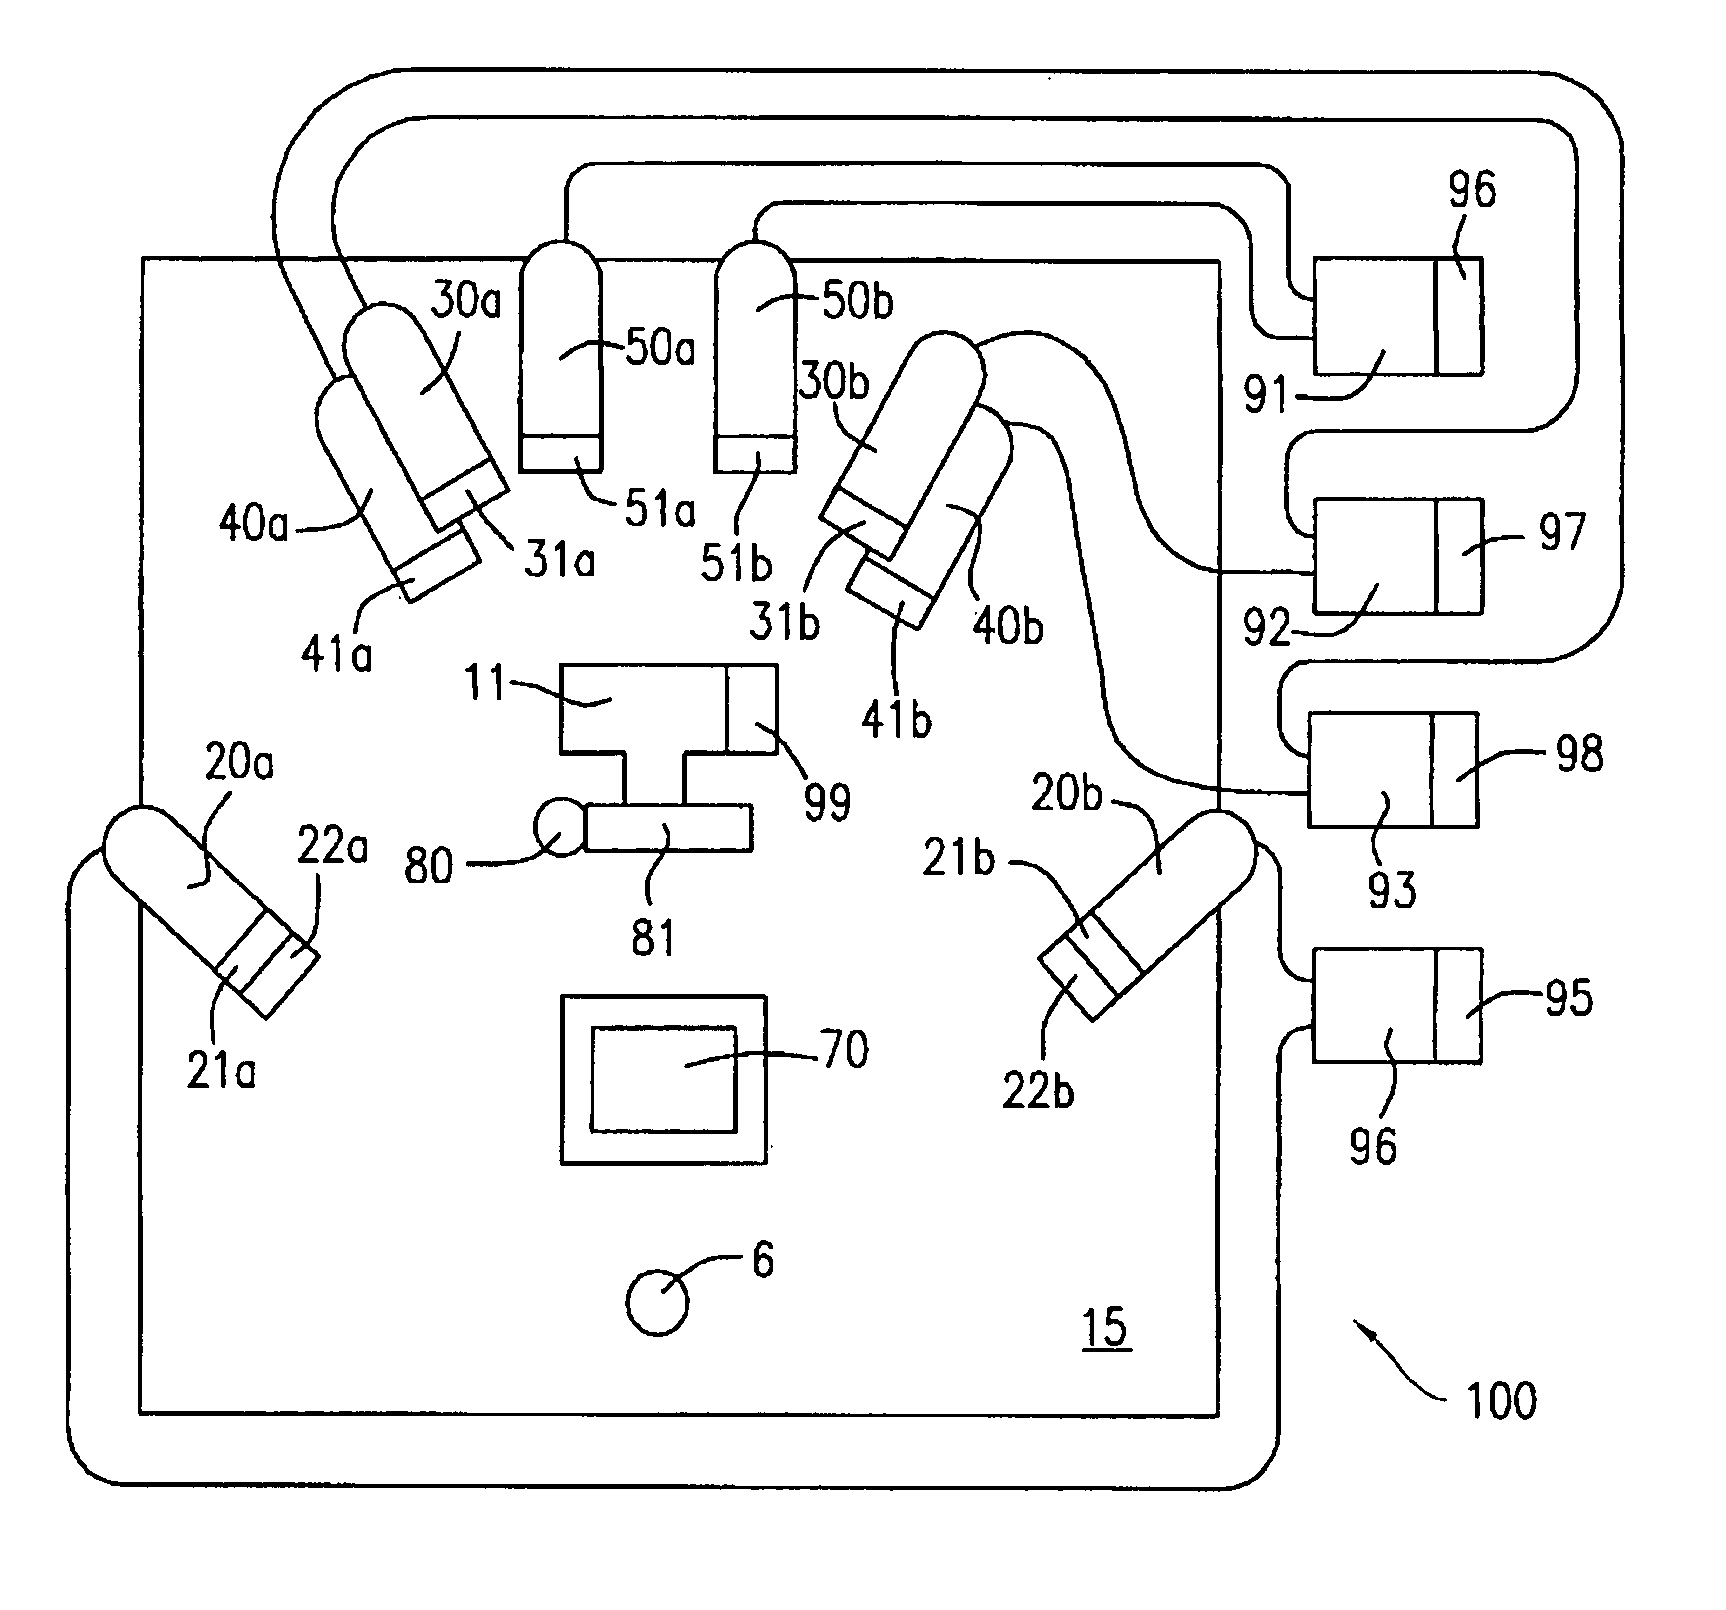 Skin Imaging system with probe